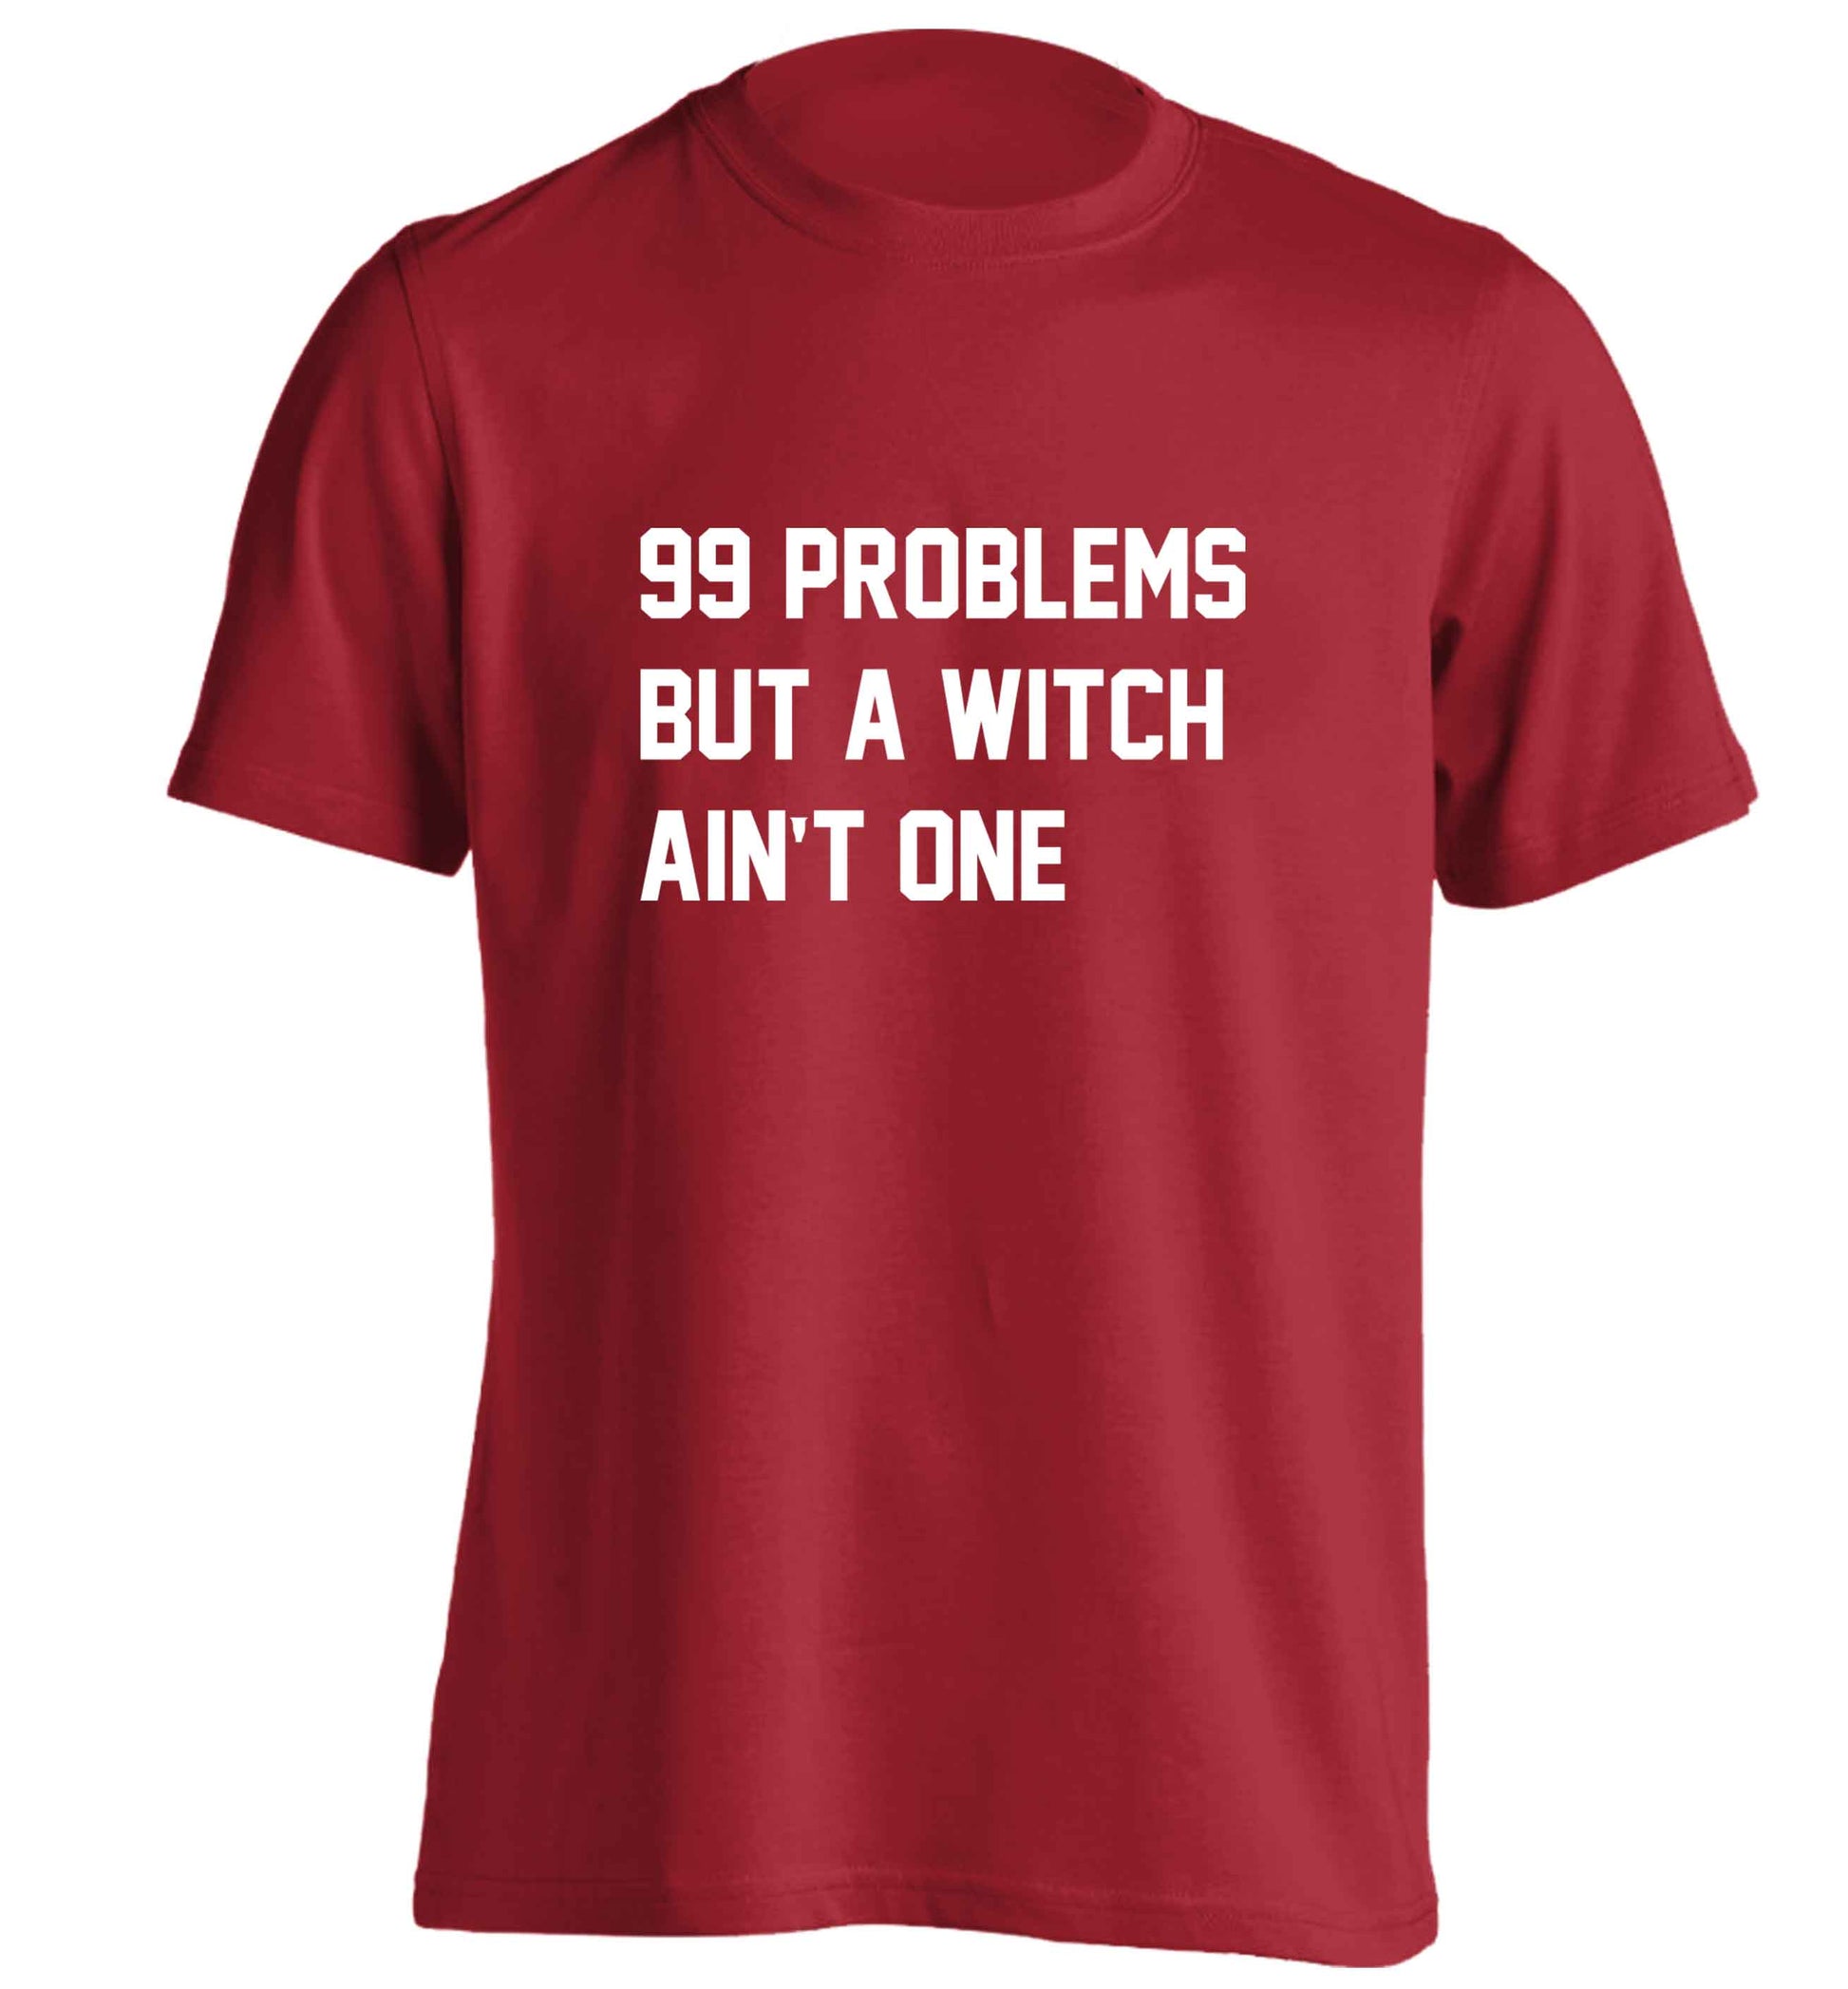 99 Problems but a witch aint one adults unisex red Tshirt 2XL